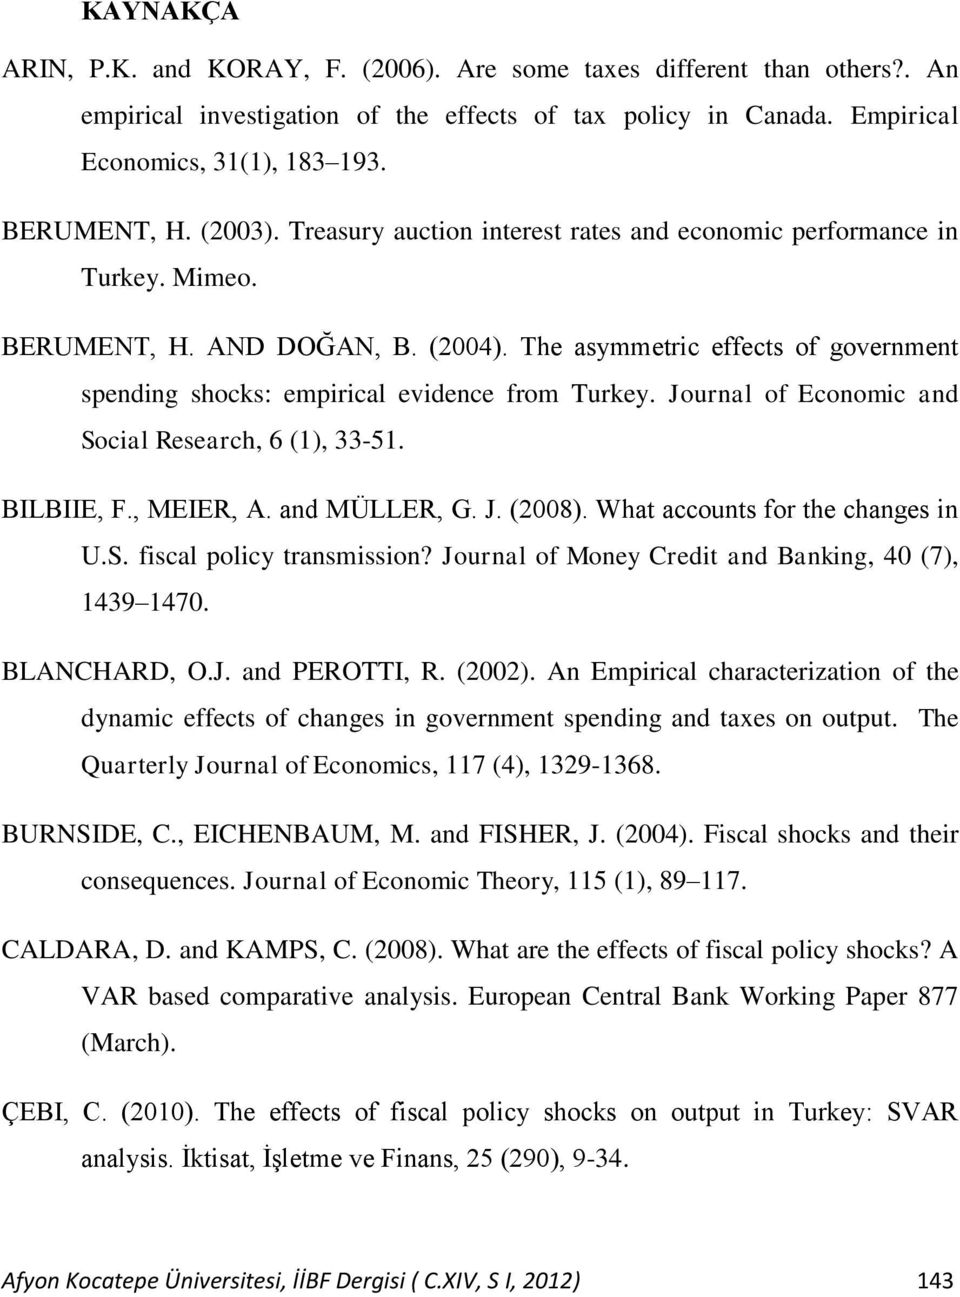 Journal of Economic and Social Research, 6 (1), 33-51. BILBIIE, F., MEIER, A. and MÜLLER, G. J. (28). What accounts for the changes in U.S. fiscal policy transmission?